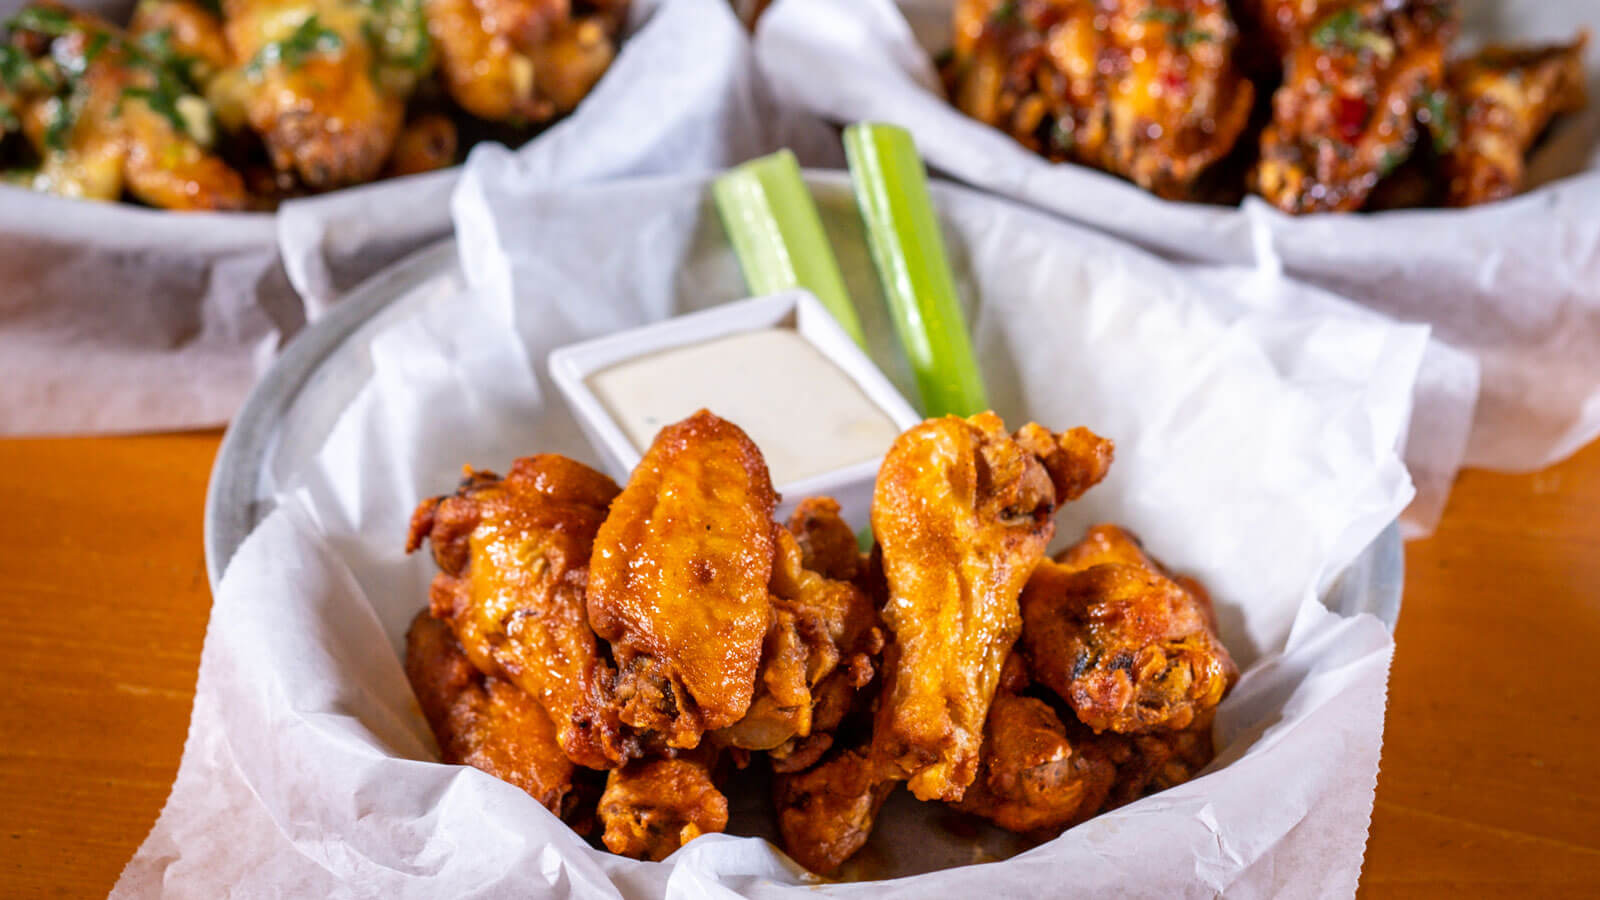 Spicy Wings from MJ23 Sports Bar & Grill - Desktop Gallery